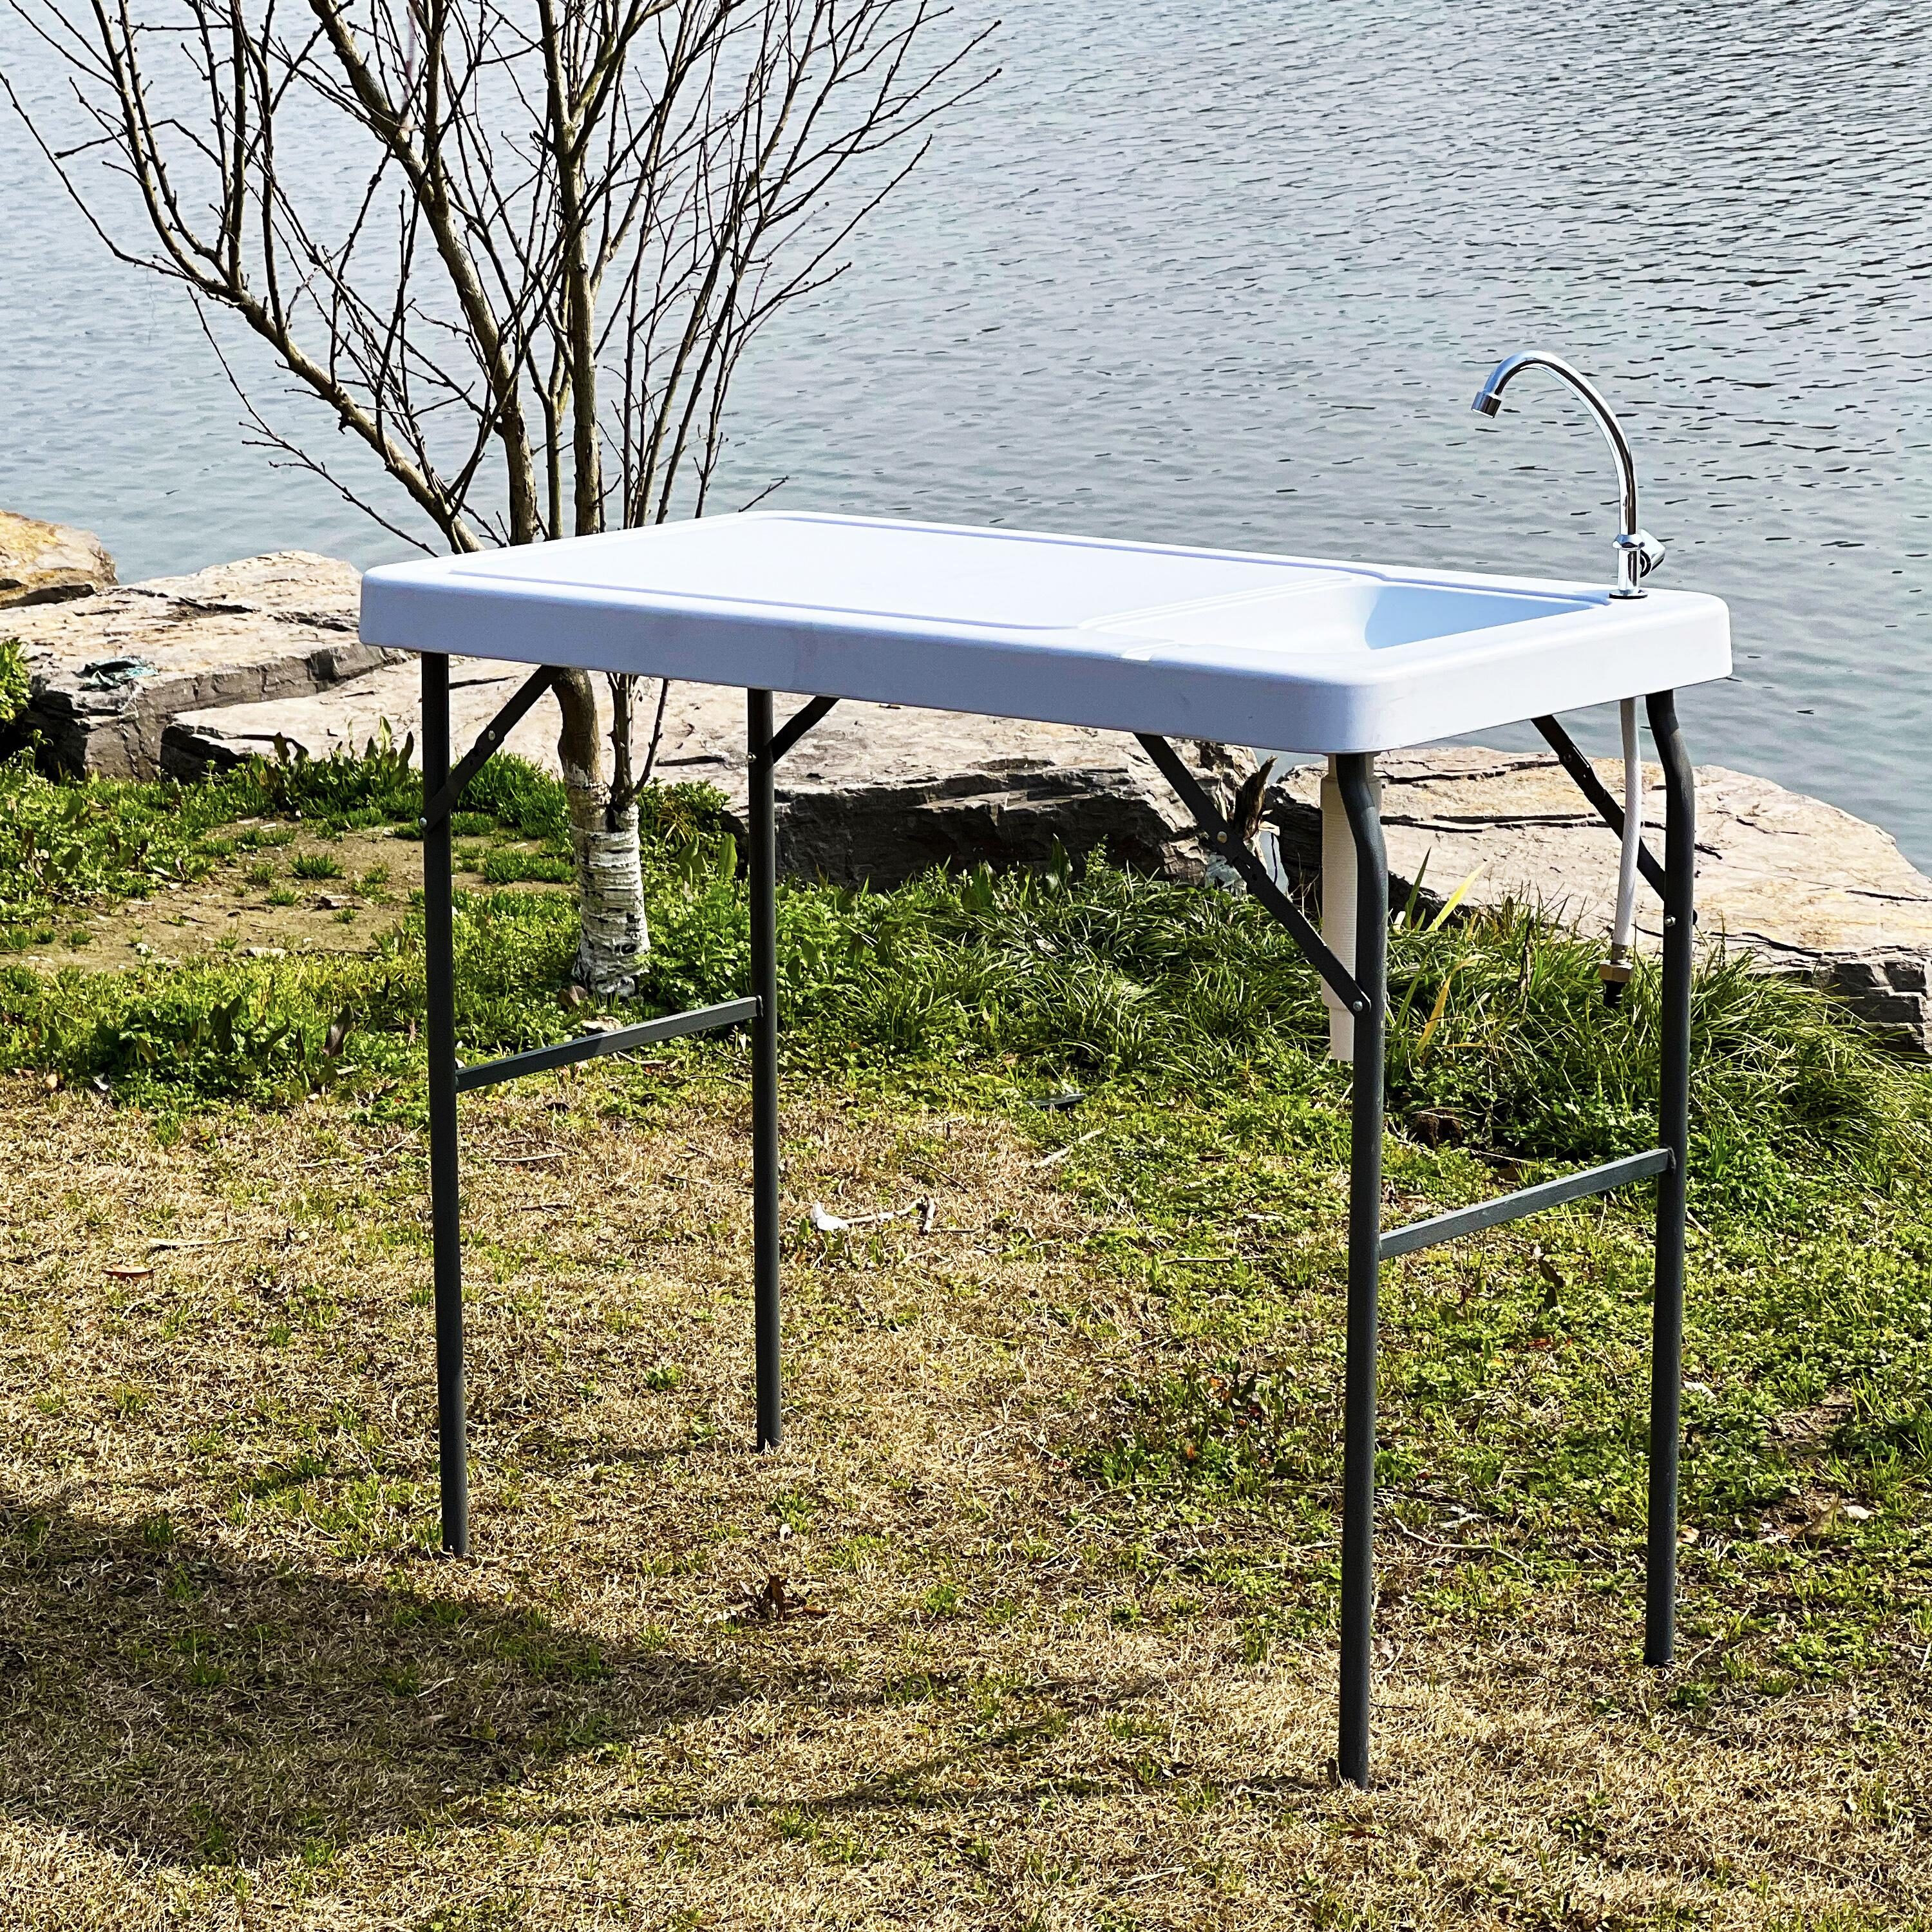 PORTABLE FOLDING OUTDOOR FISH FILLET TABLE - CLEANING/CUTTING SINK